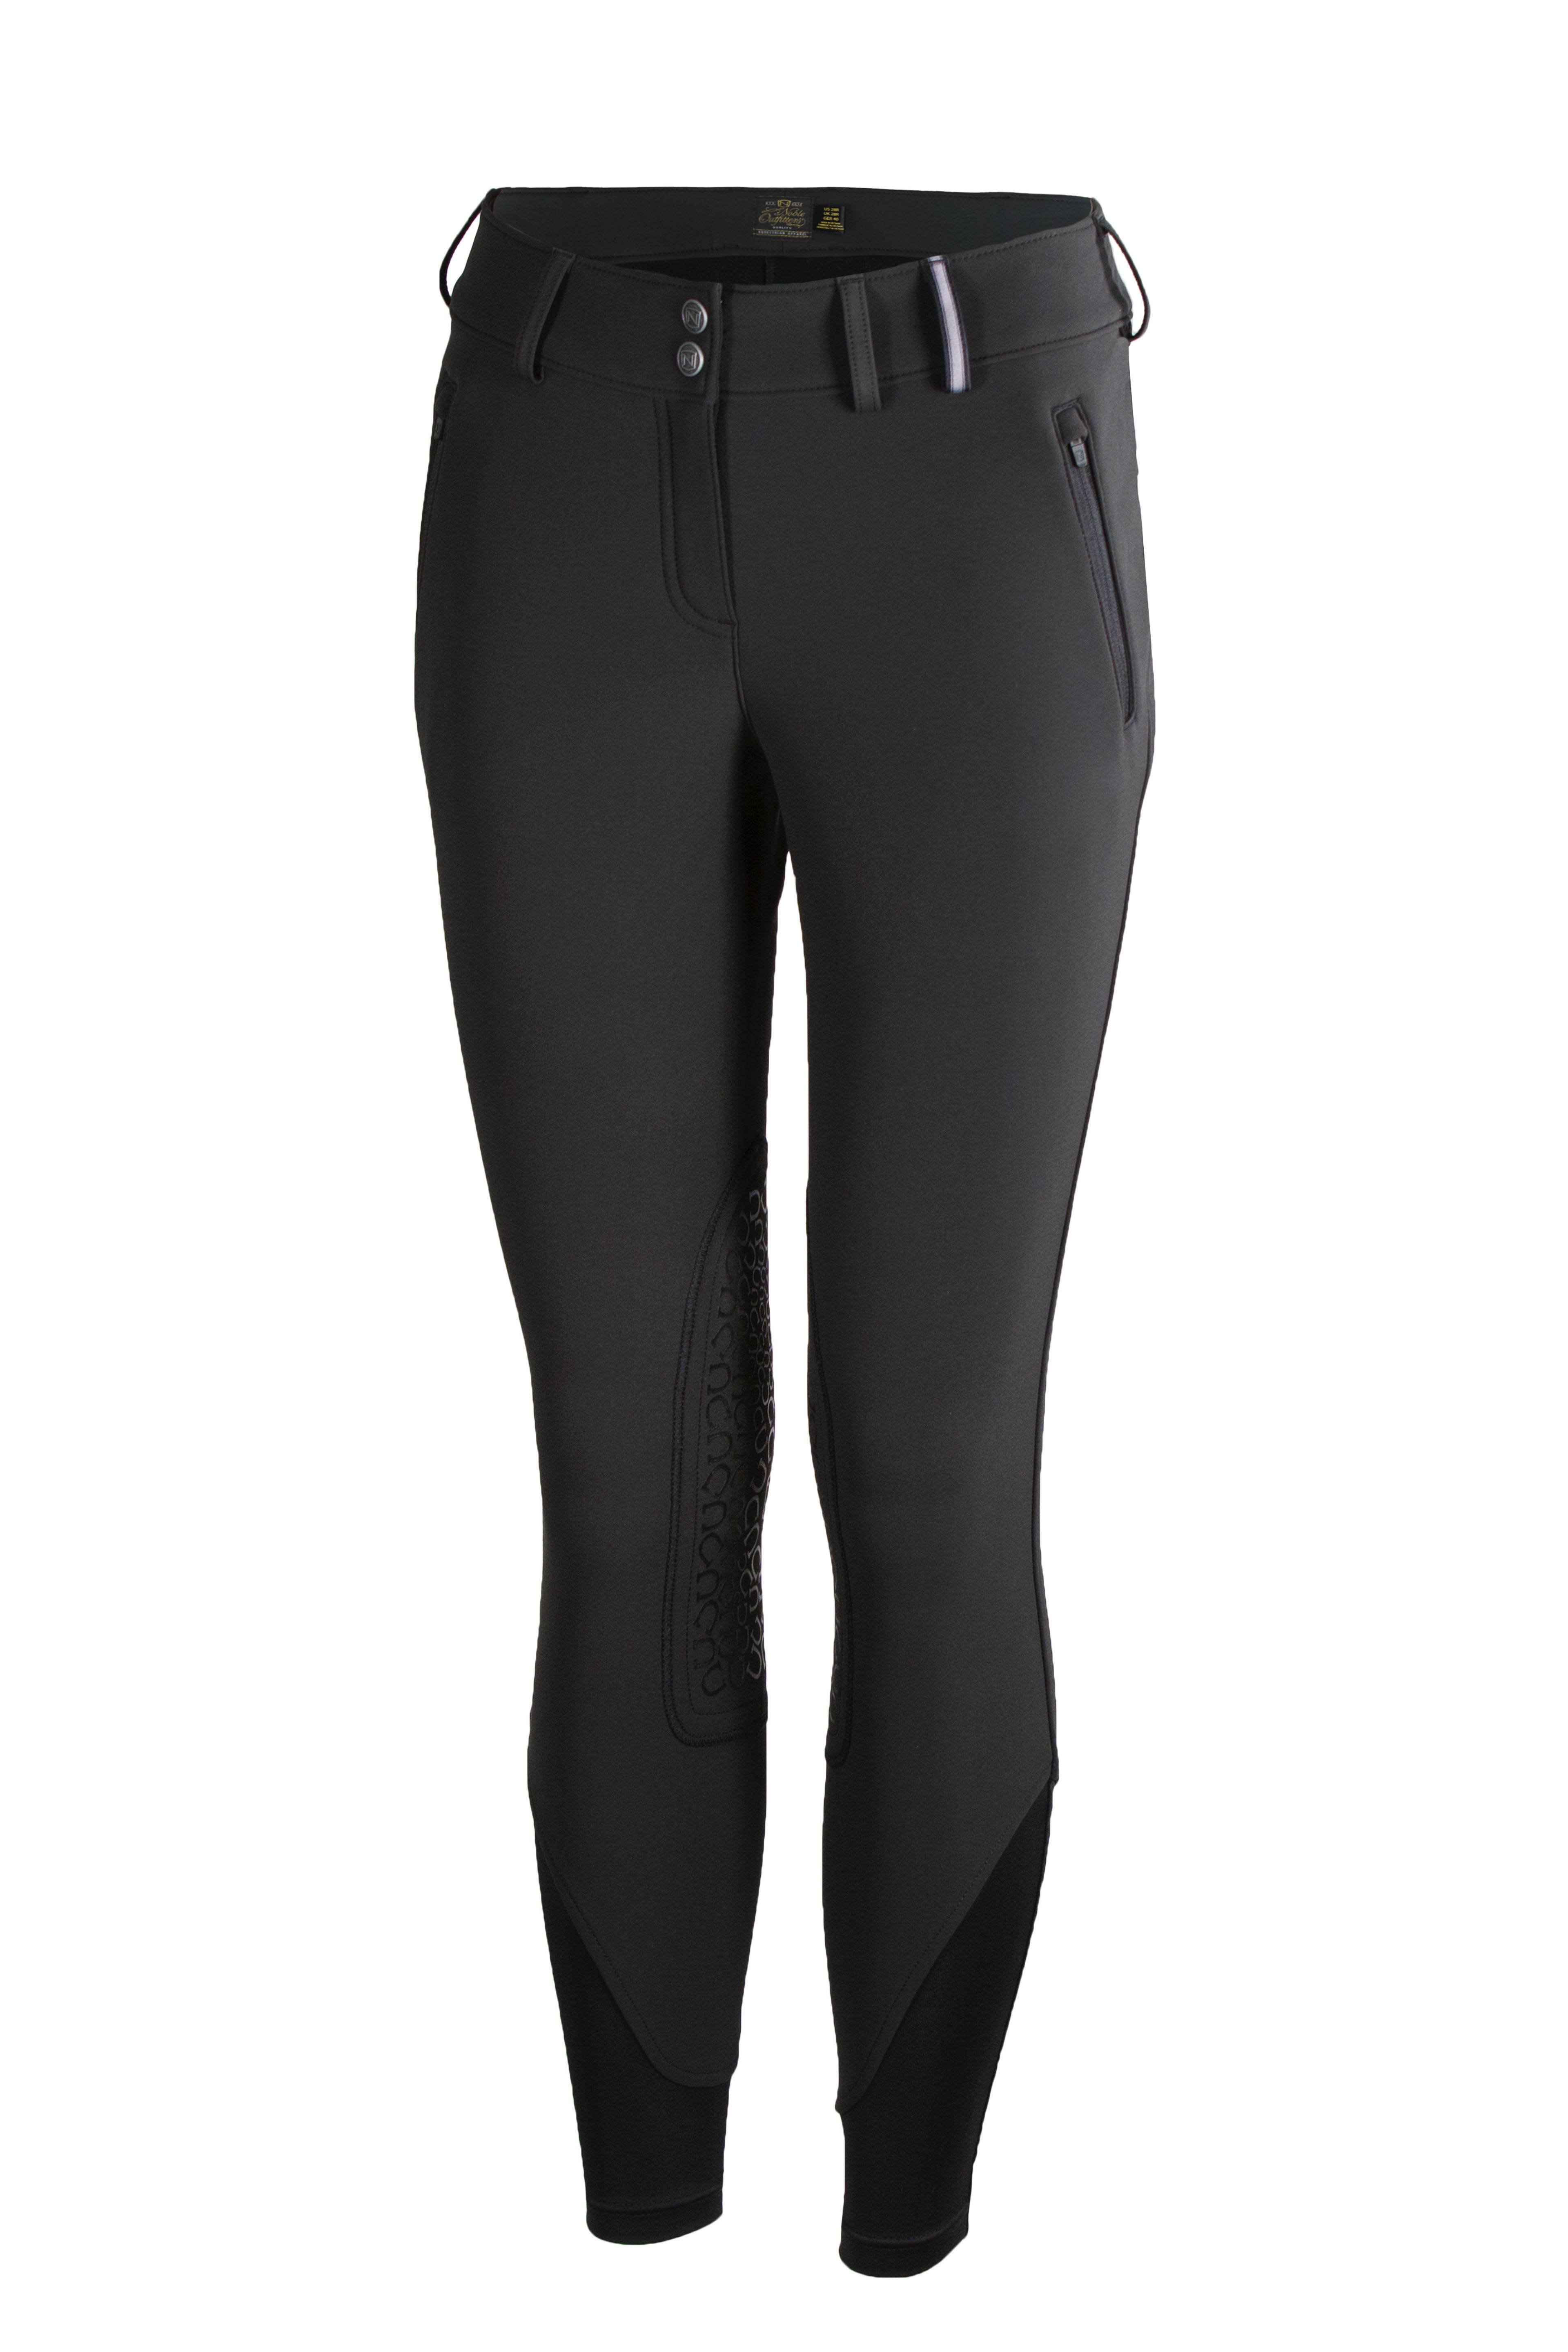 Noble Outfitters Softshell Winter Riding Pants-  Ladies